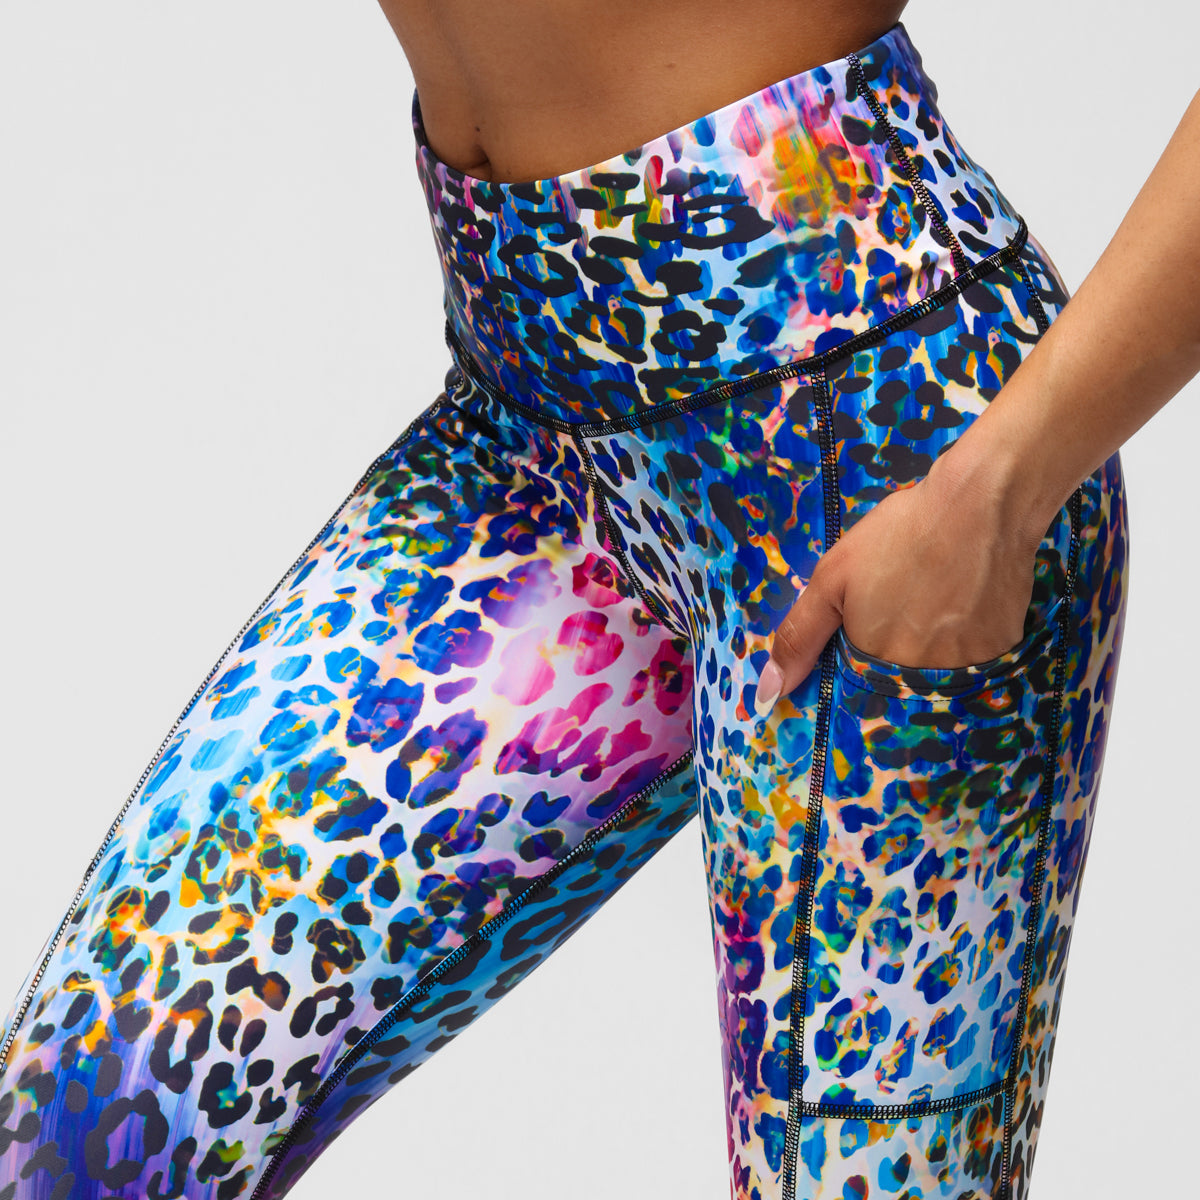 Maple Leaf Skyline Yoga Pants For Women High Waist Leggings with Pockets  For Gym Workout Tights : Amazon.co.uk: Fashion